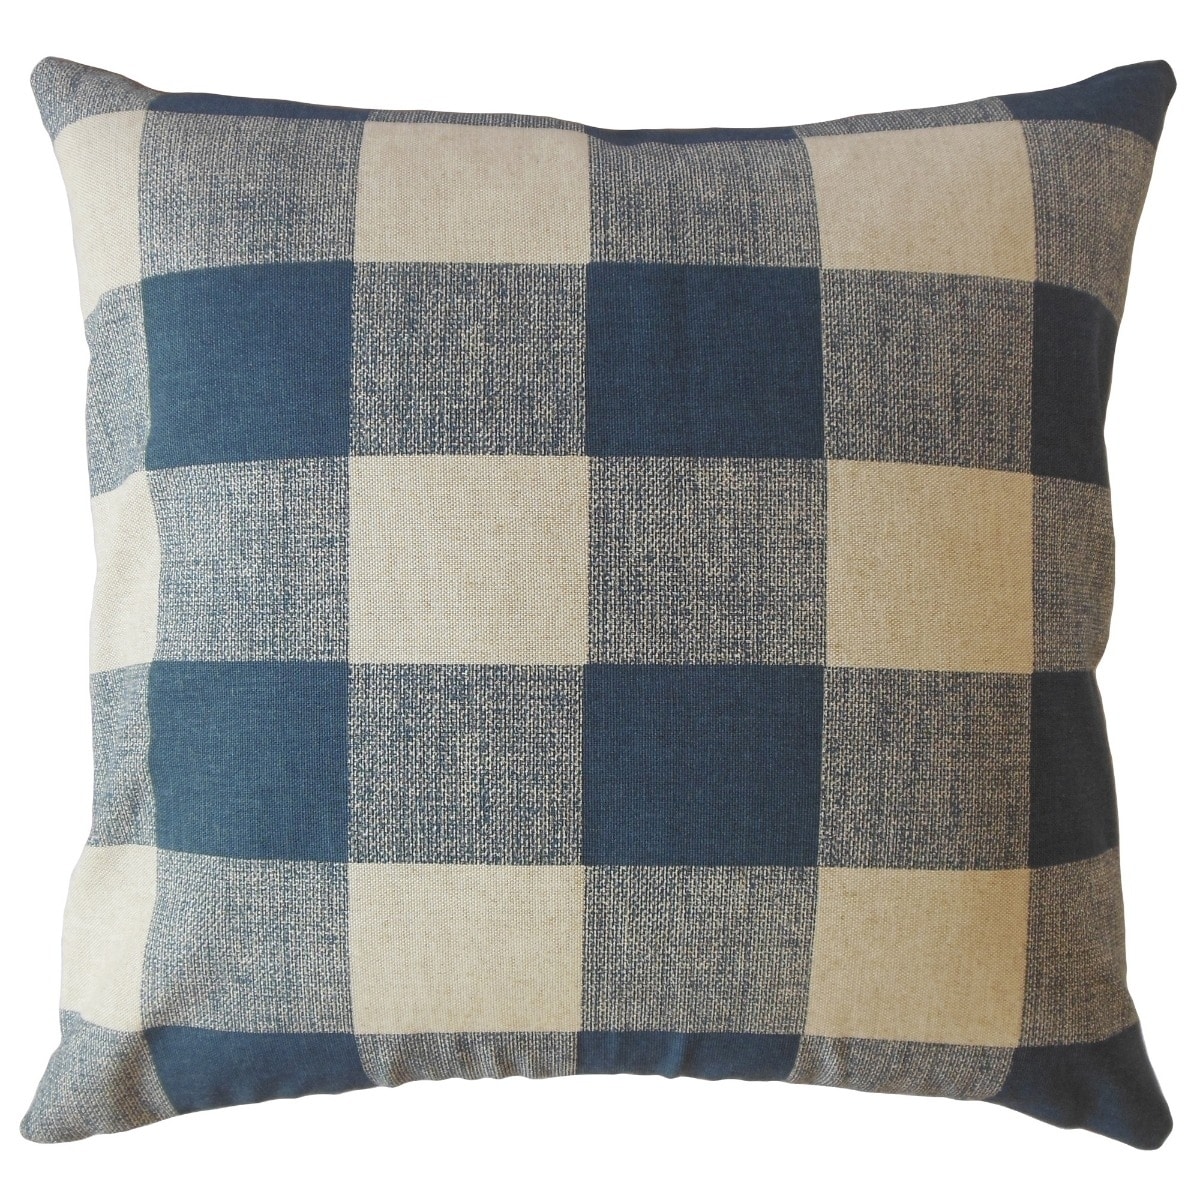 The Pillow Collection  Oormi Plaid Decorative Throw Pillow Black Euro Square - image 5 of 5